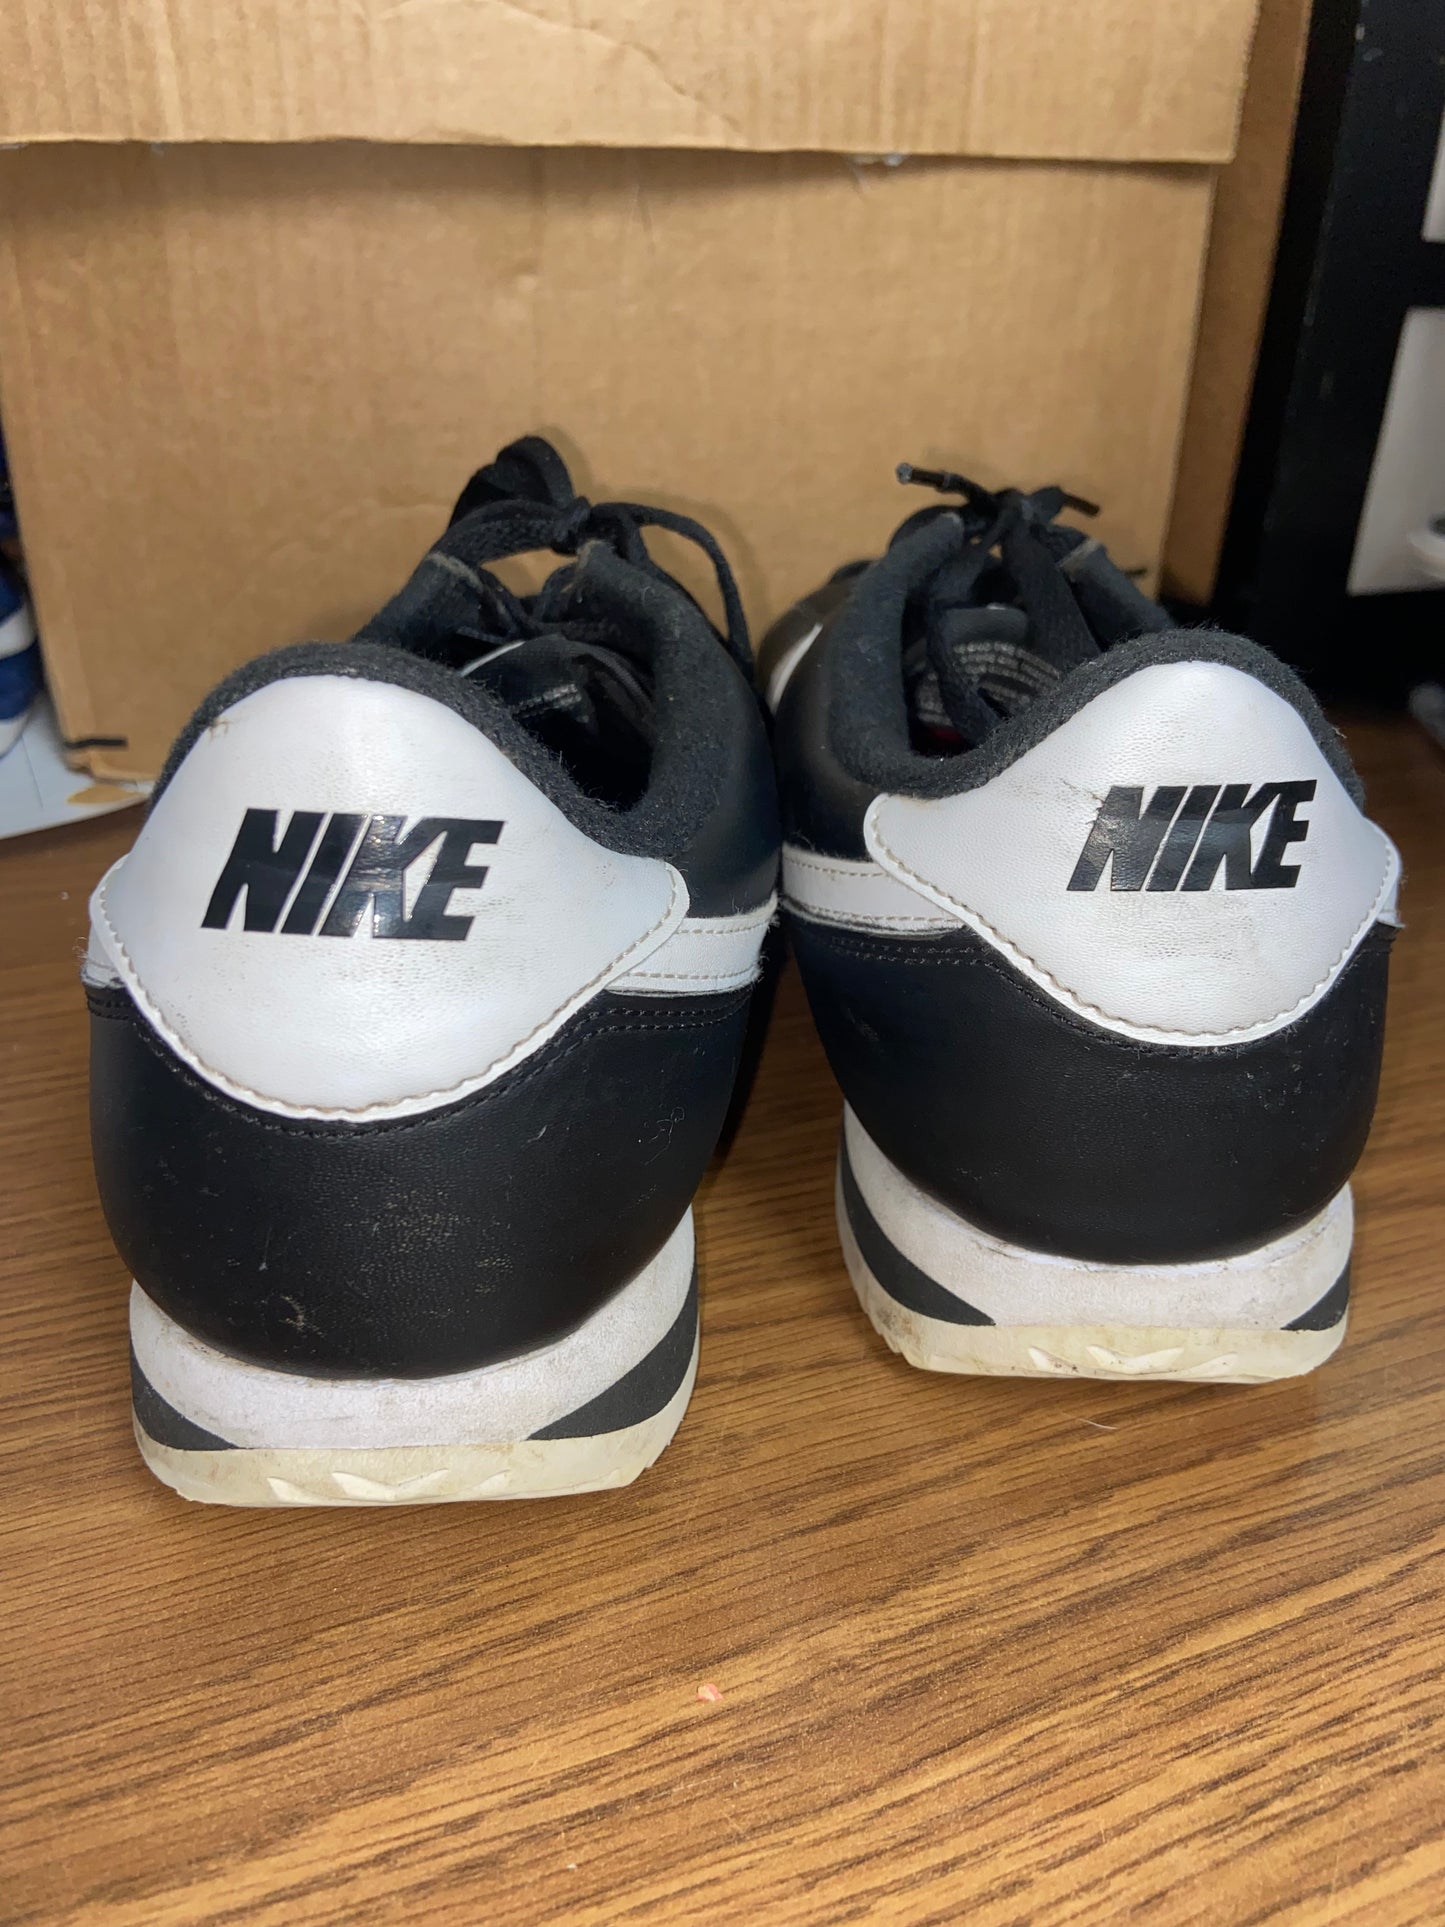 Nike Cortez Black and White Sneakers (Size 10)